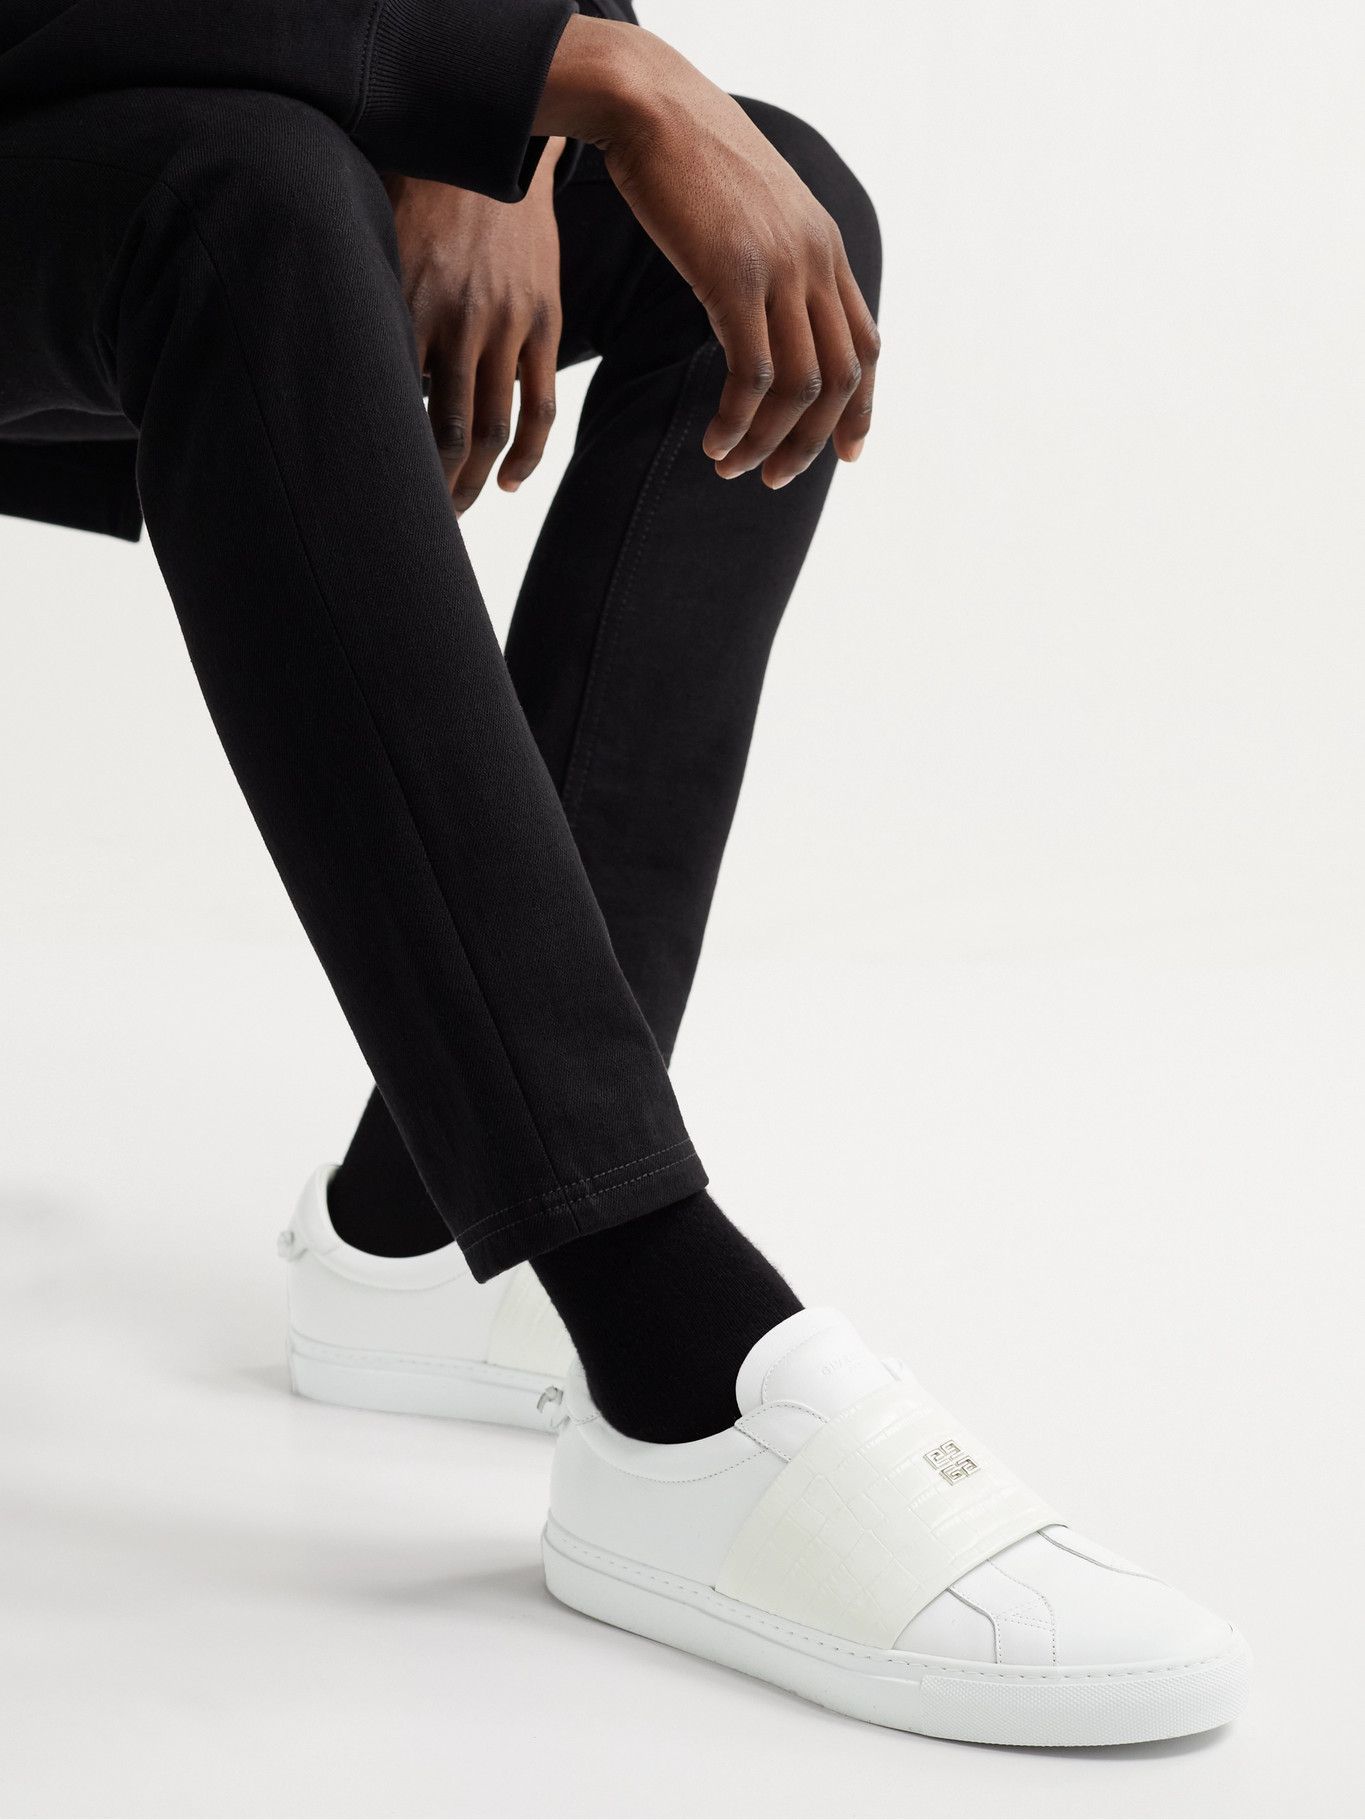 GIVENCHY - Urban Street Smooth and Croc-Effect Leather Slip-On Sneakers -  White Givenchy